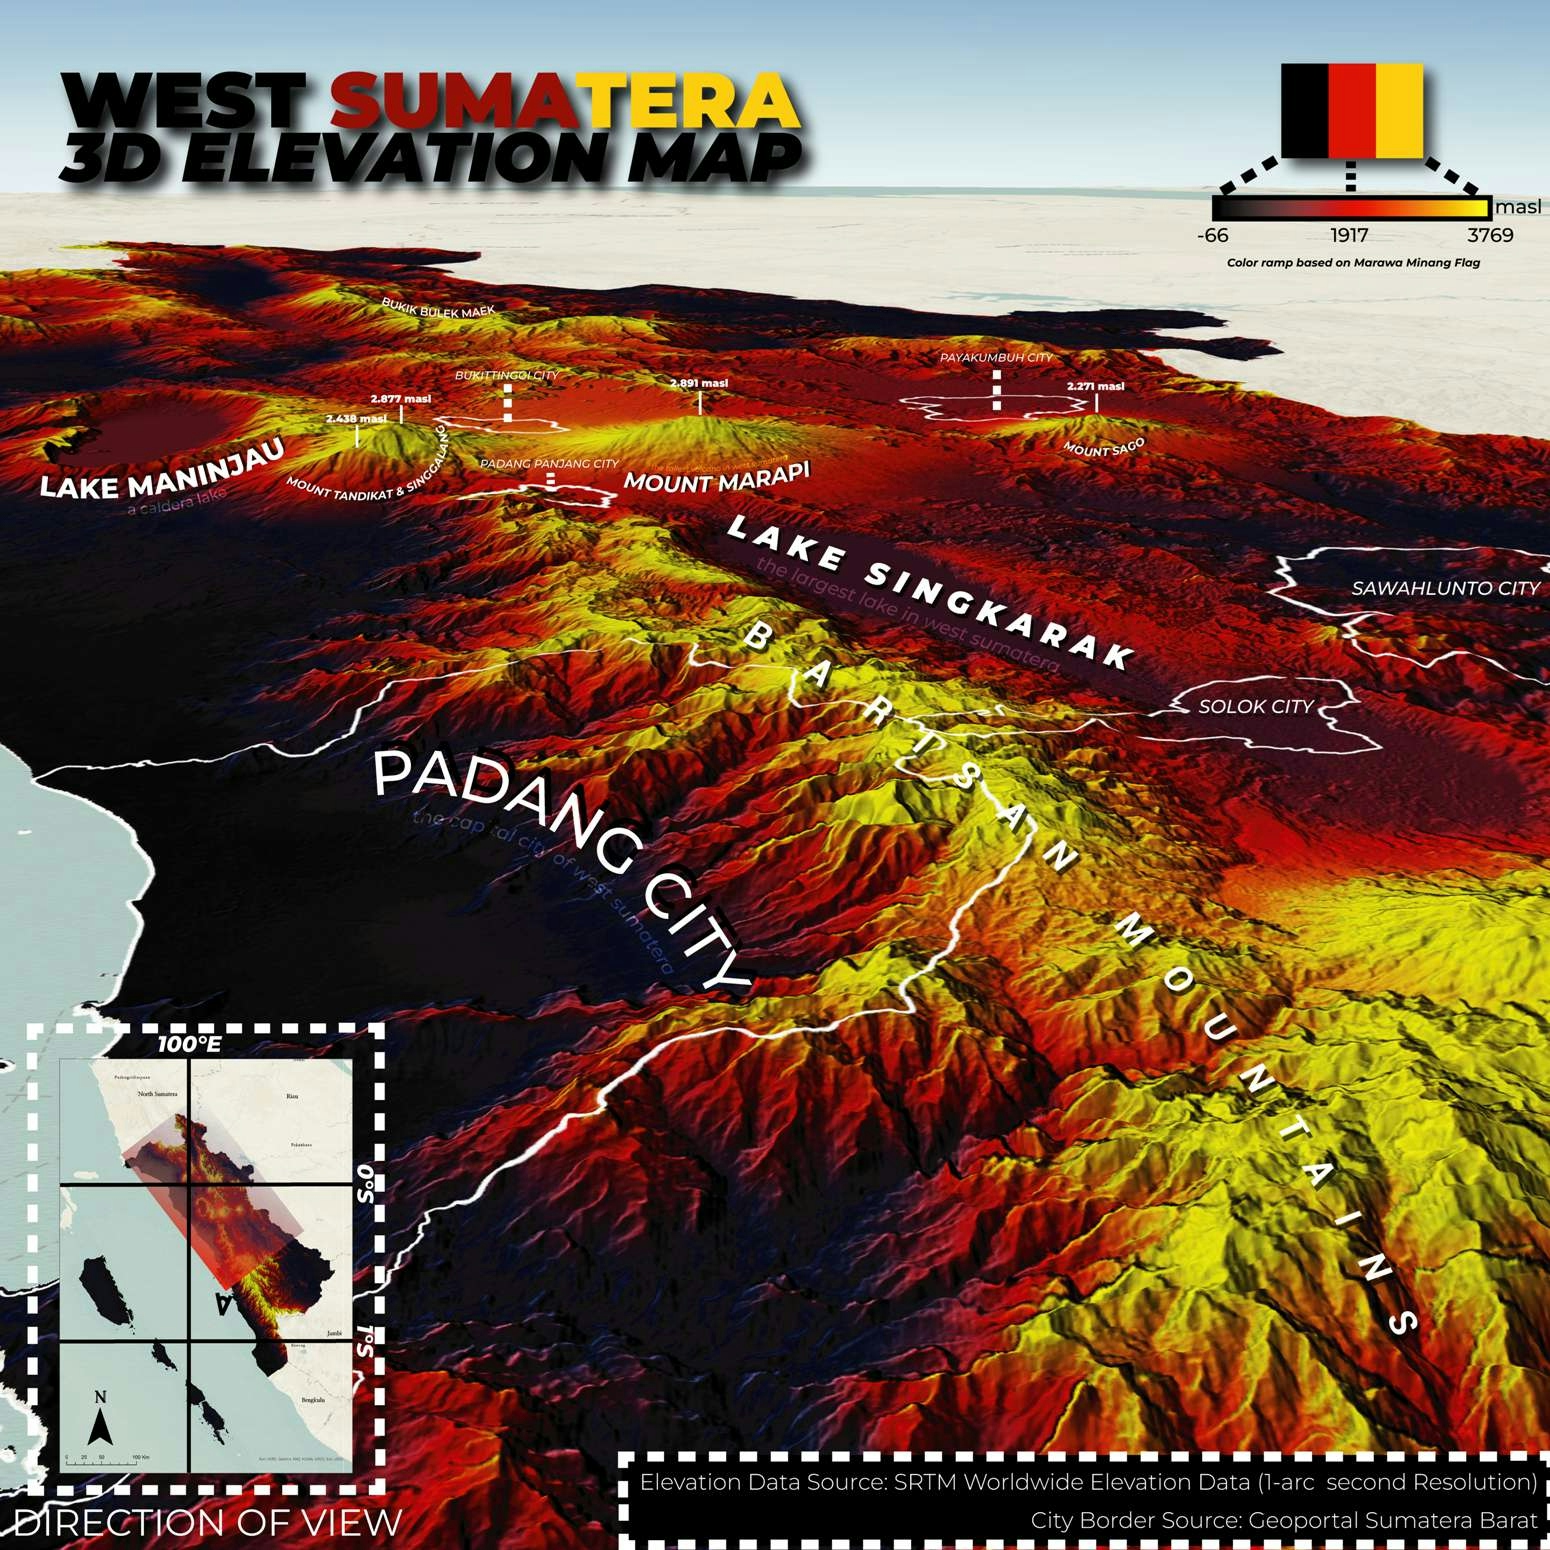 3D Elevation Map of West Sumatera